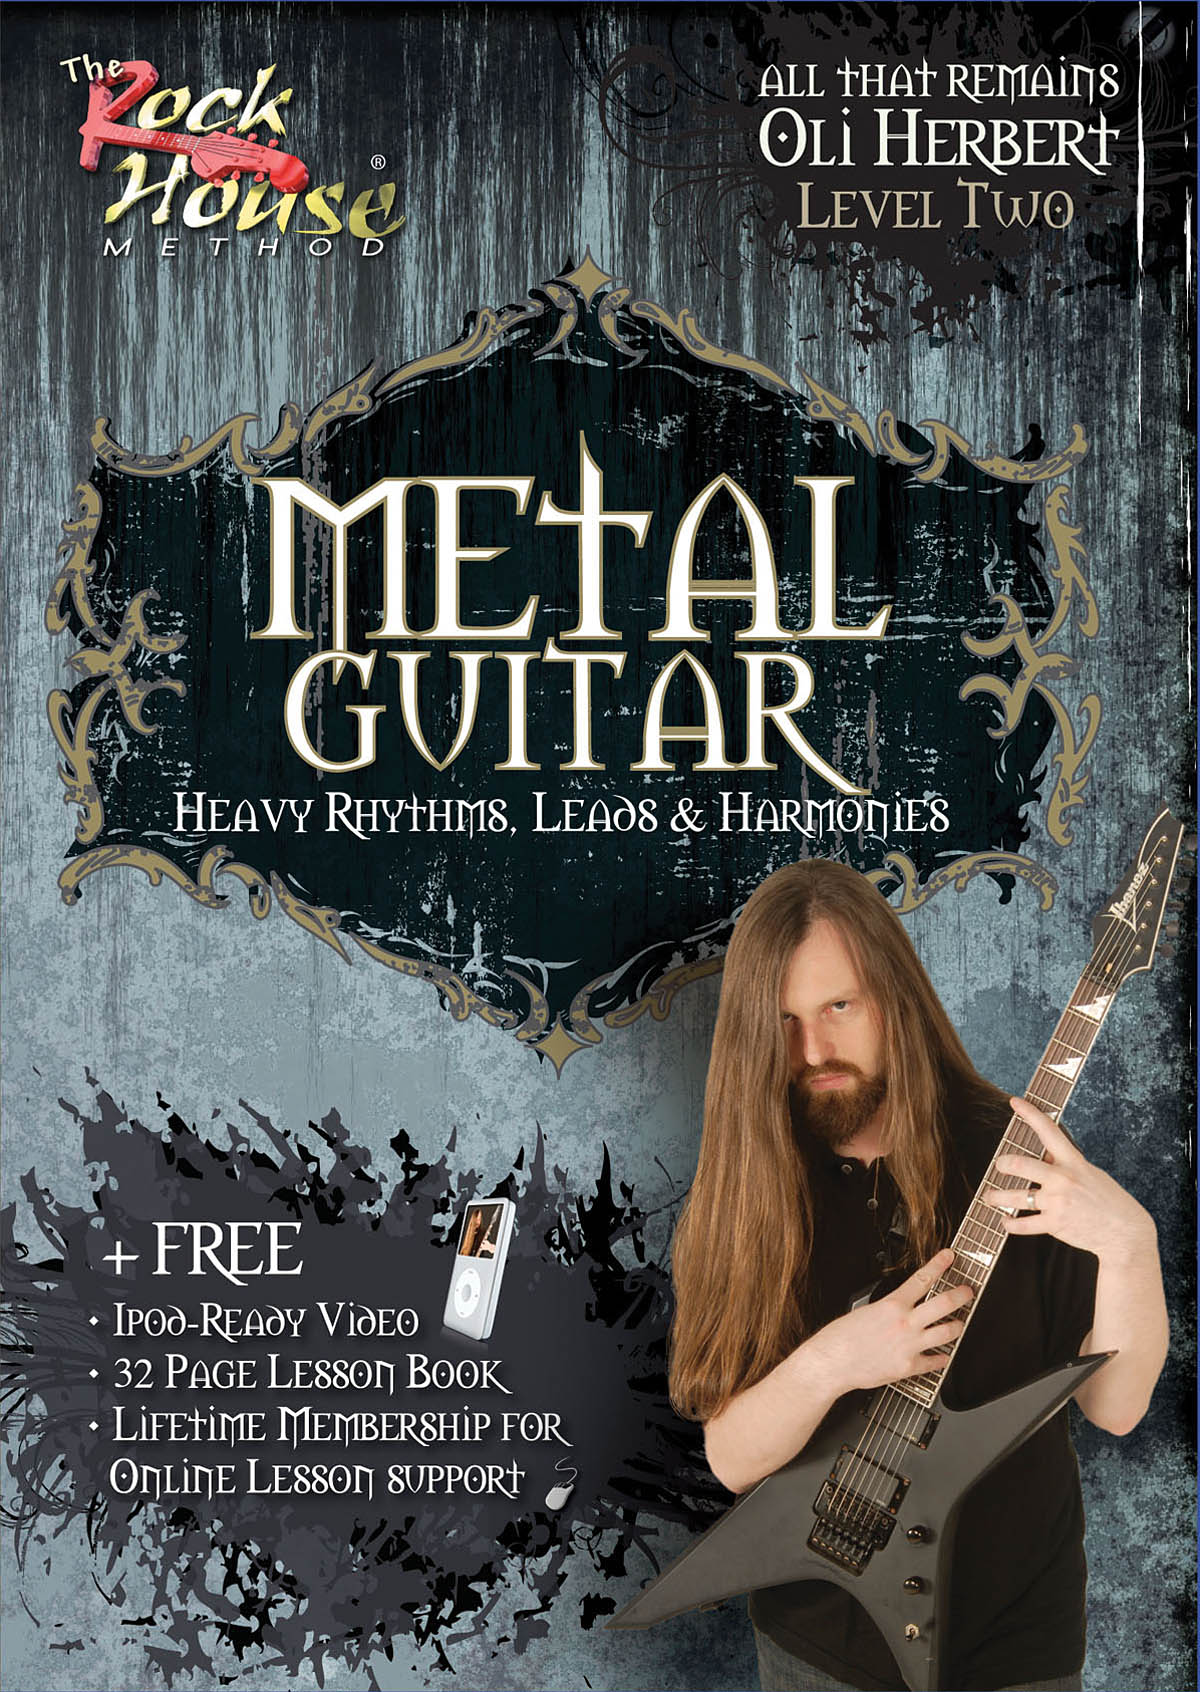 All That Remains: Oli Herbert from All That Remains - Metal Guitar: Guitar: